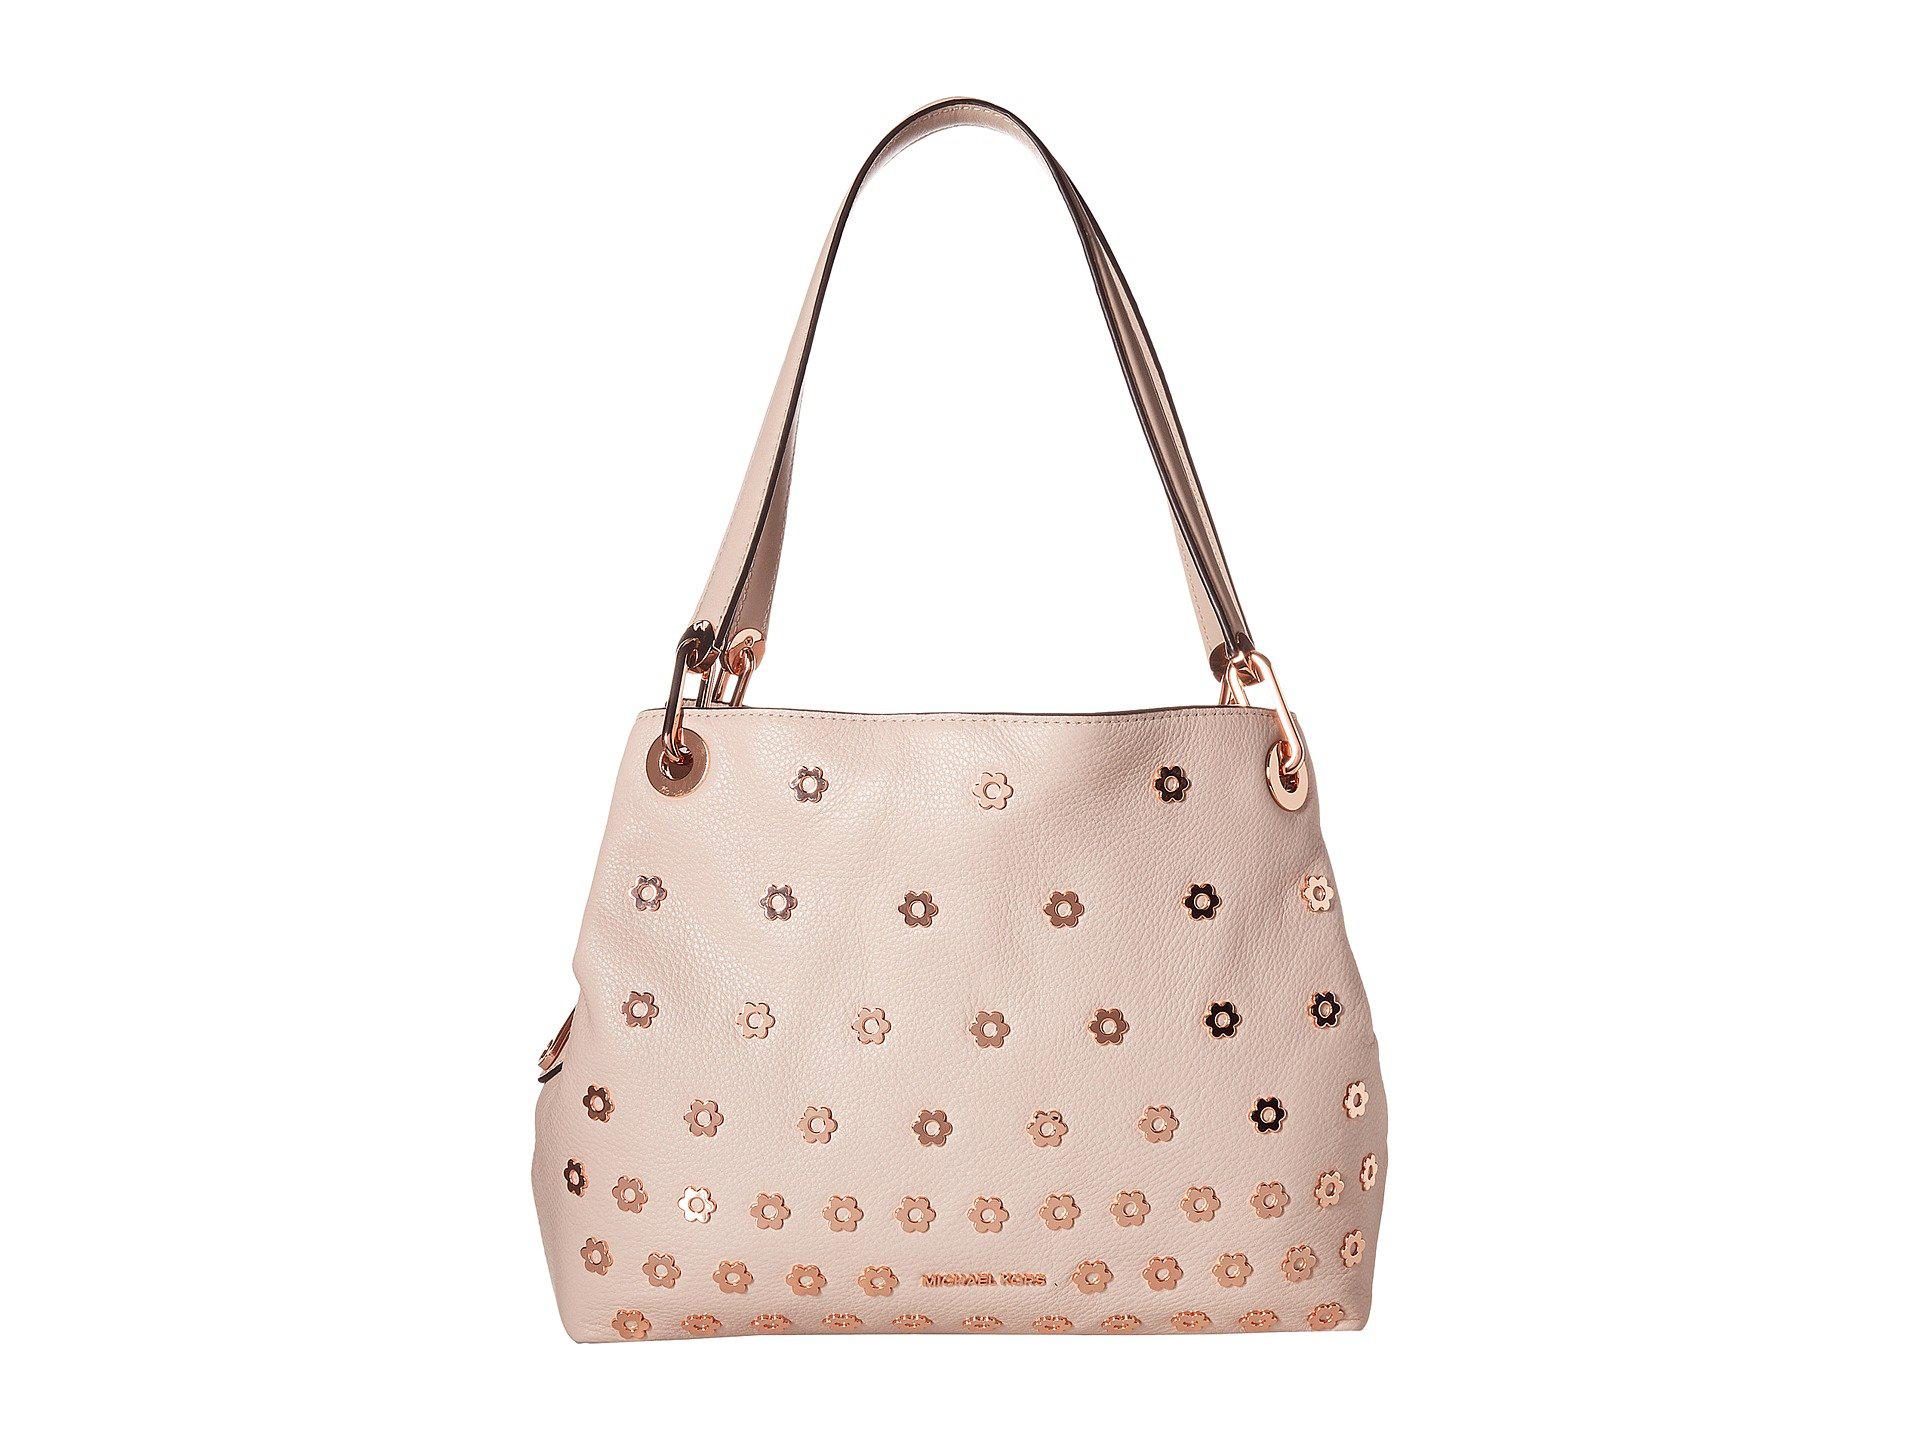 MICHAEL Michael Kors Leather Raven Large Shoulder Tote in Soft Pink (Pink) - Lyst